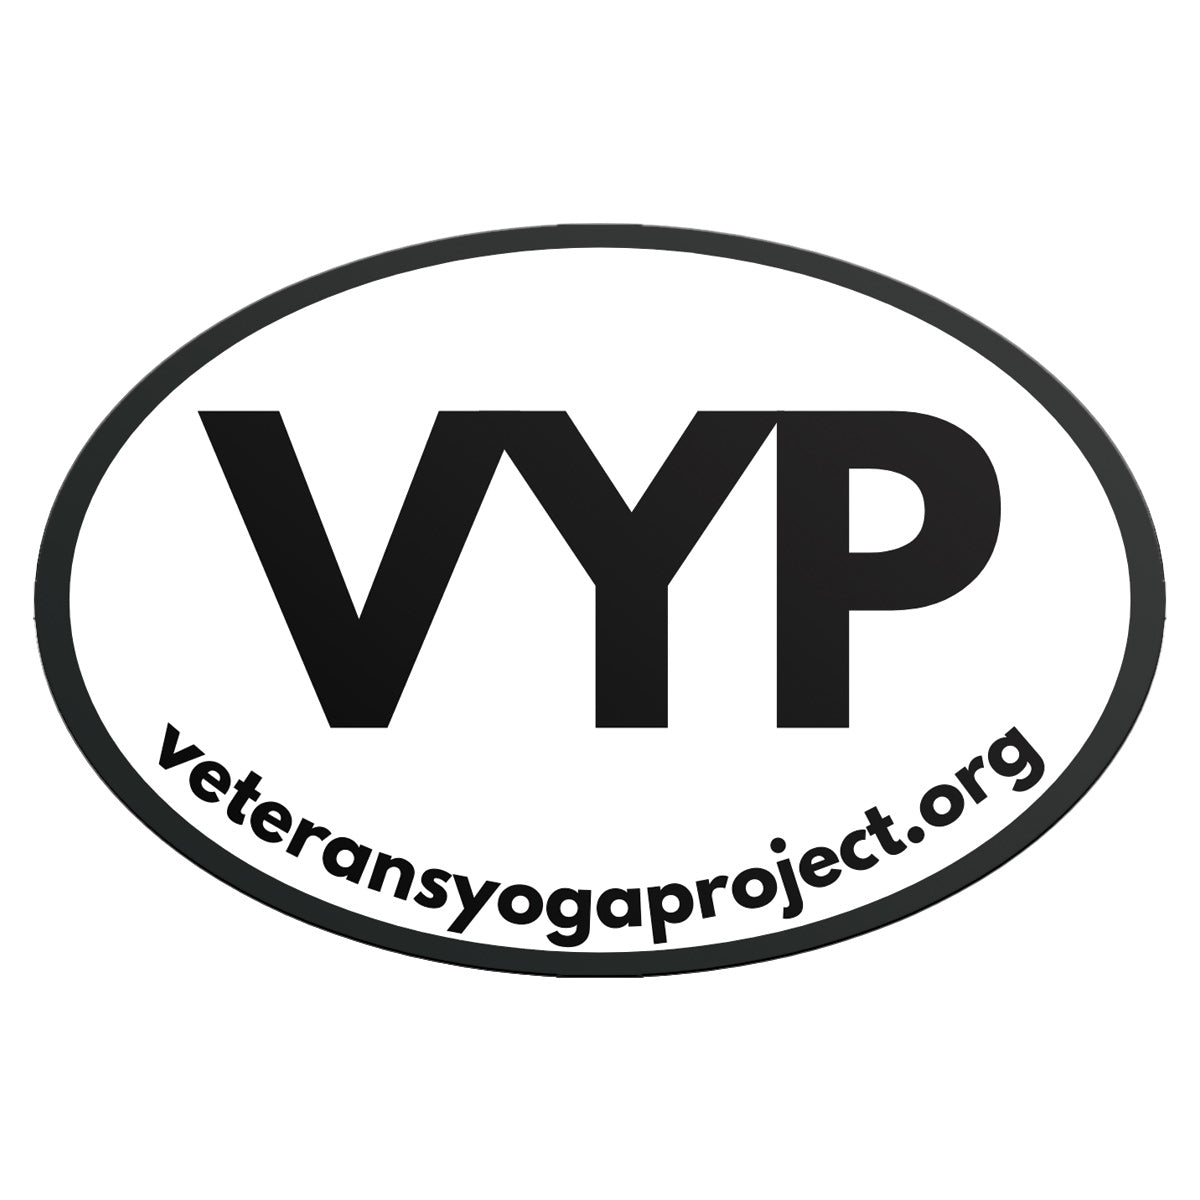 VYP Window Cling